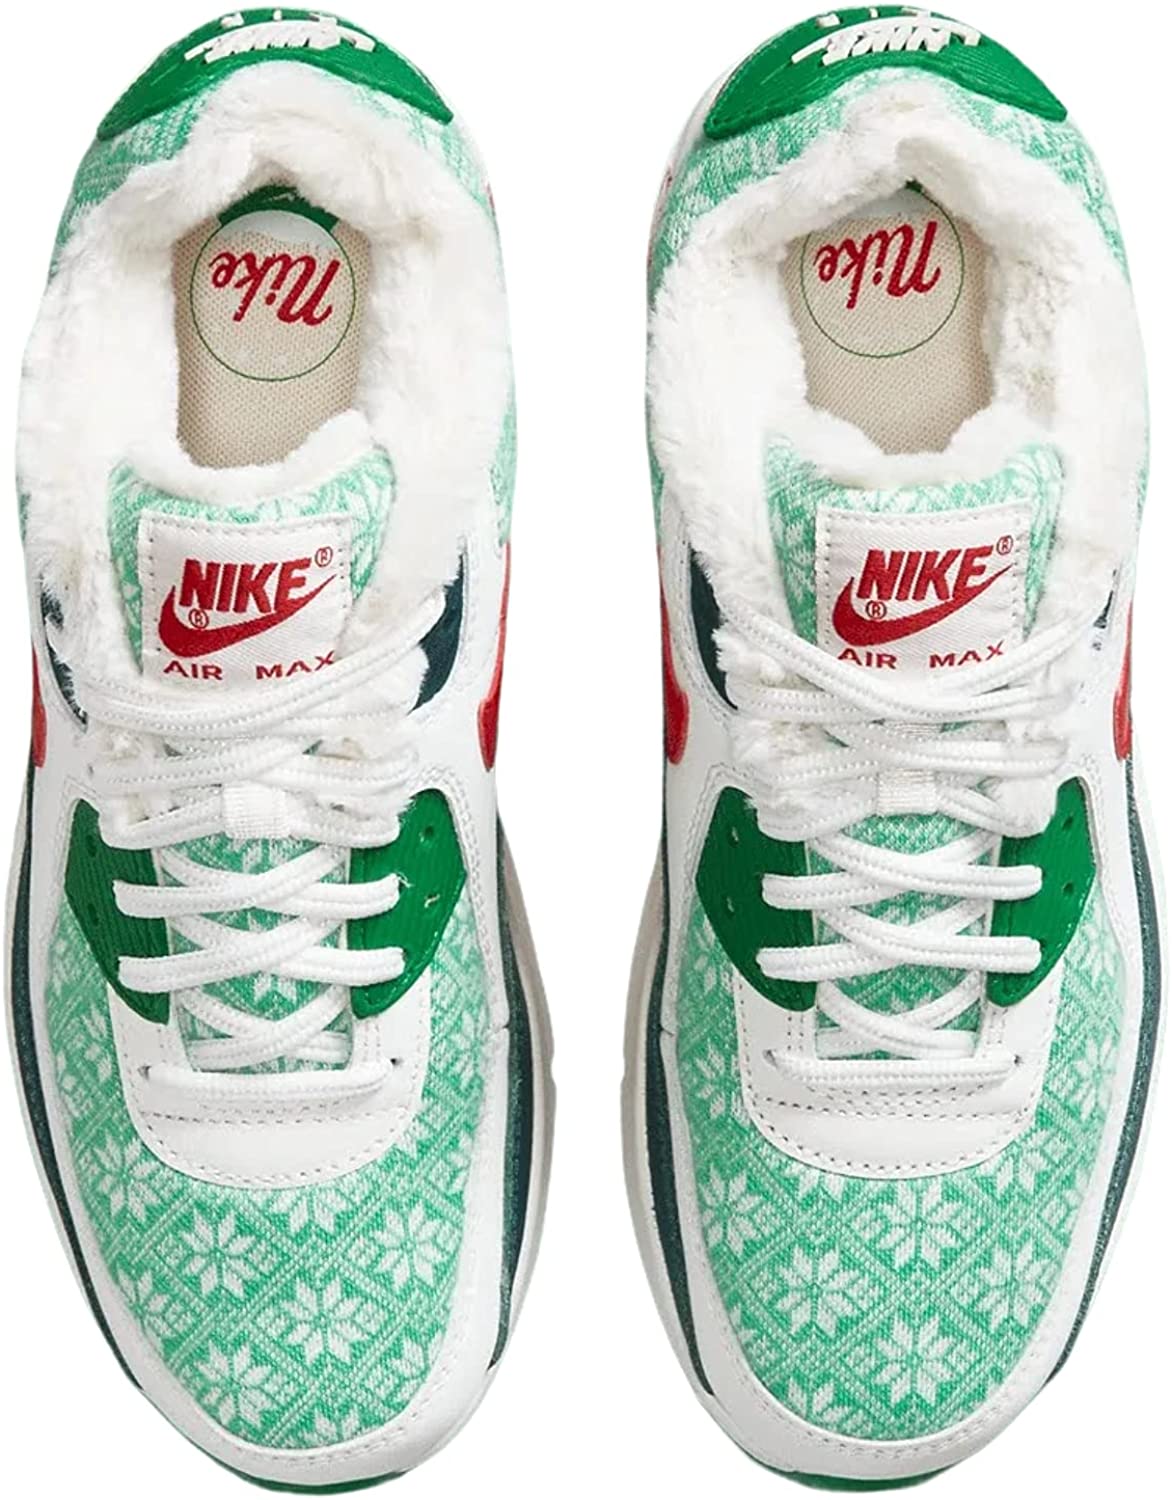 Detail Nike Air Max 90 Christmas Sweater Casual Shoes Nomer 21